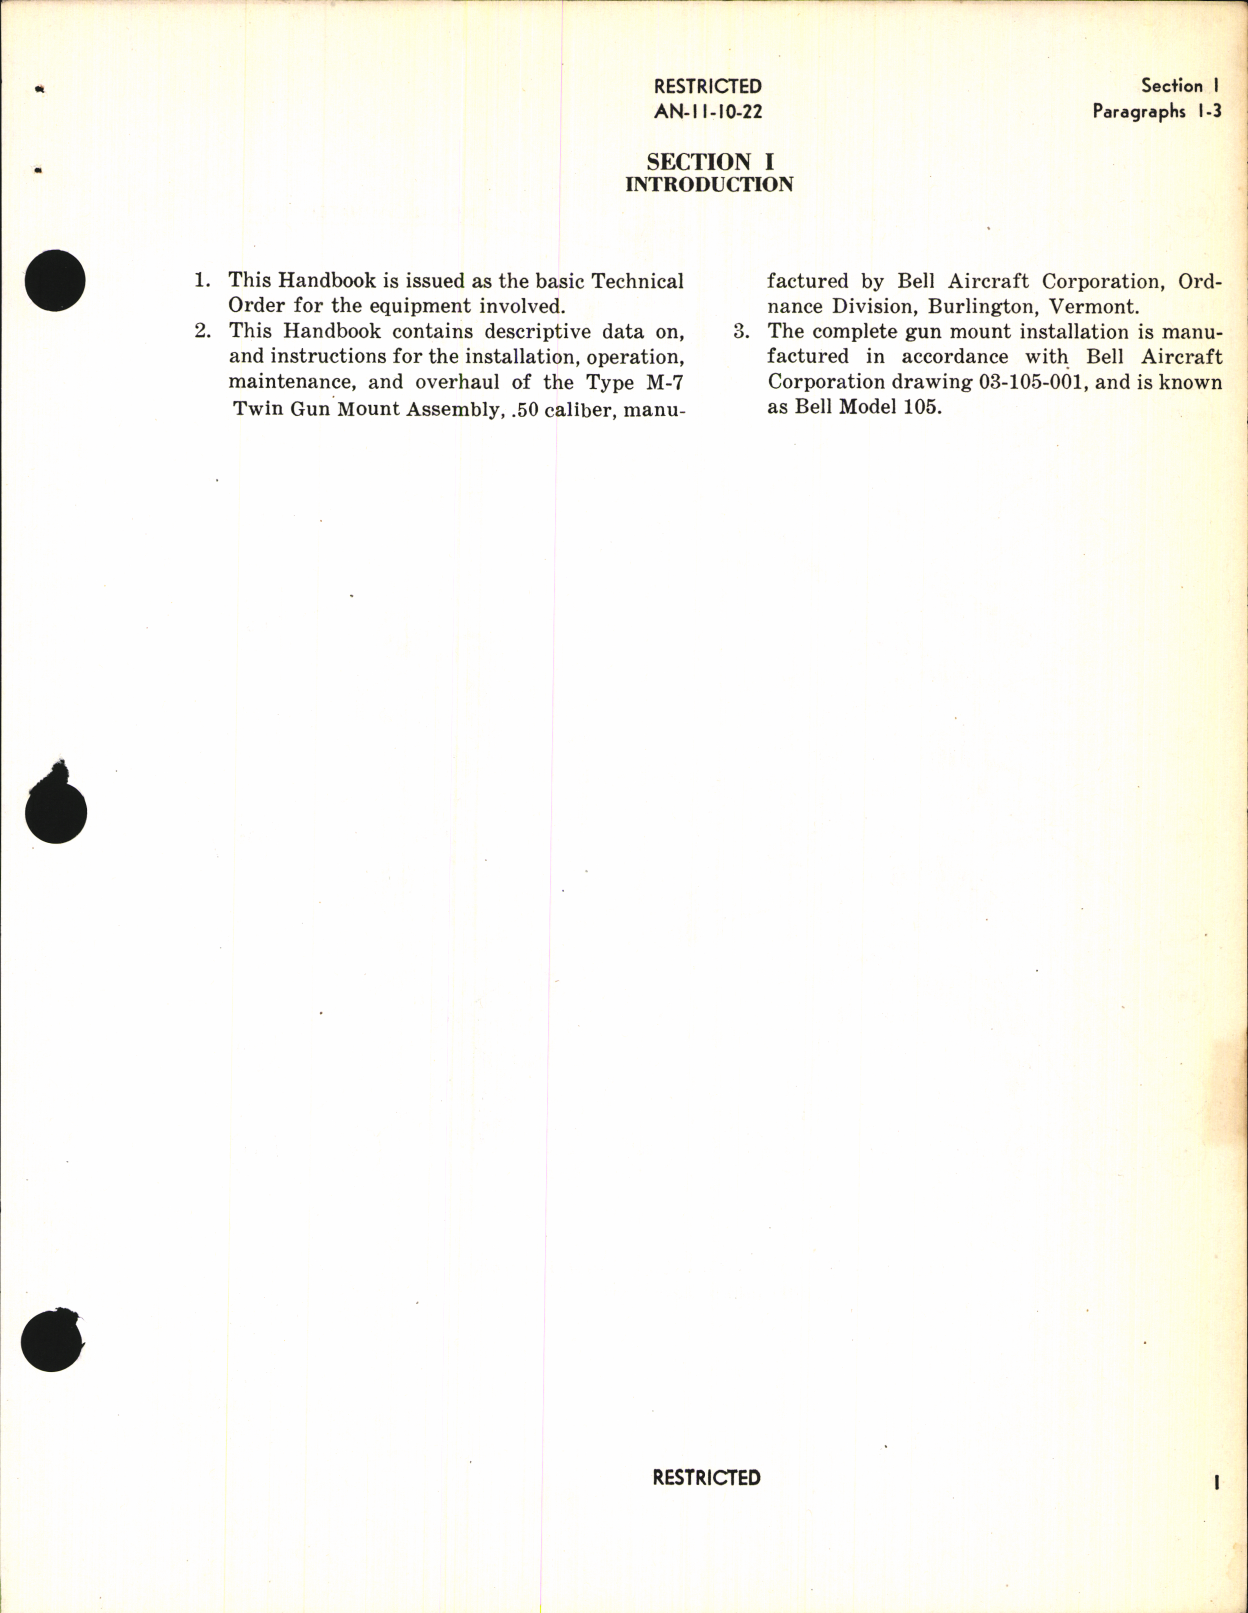 Sample page 5 from AirCorps Library document: Handbook of Instructions with Parts Catalog for Bell Twin Gun Mount Assembly Type M-7